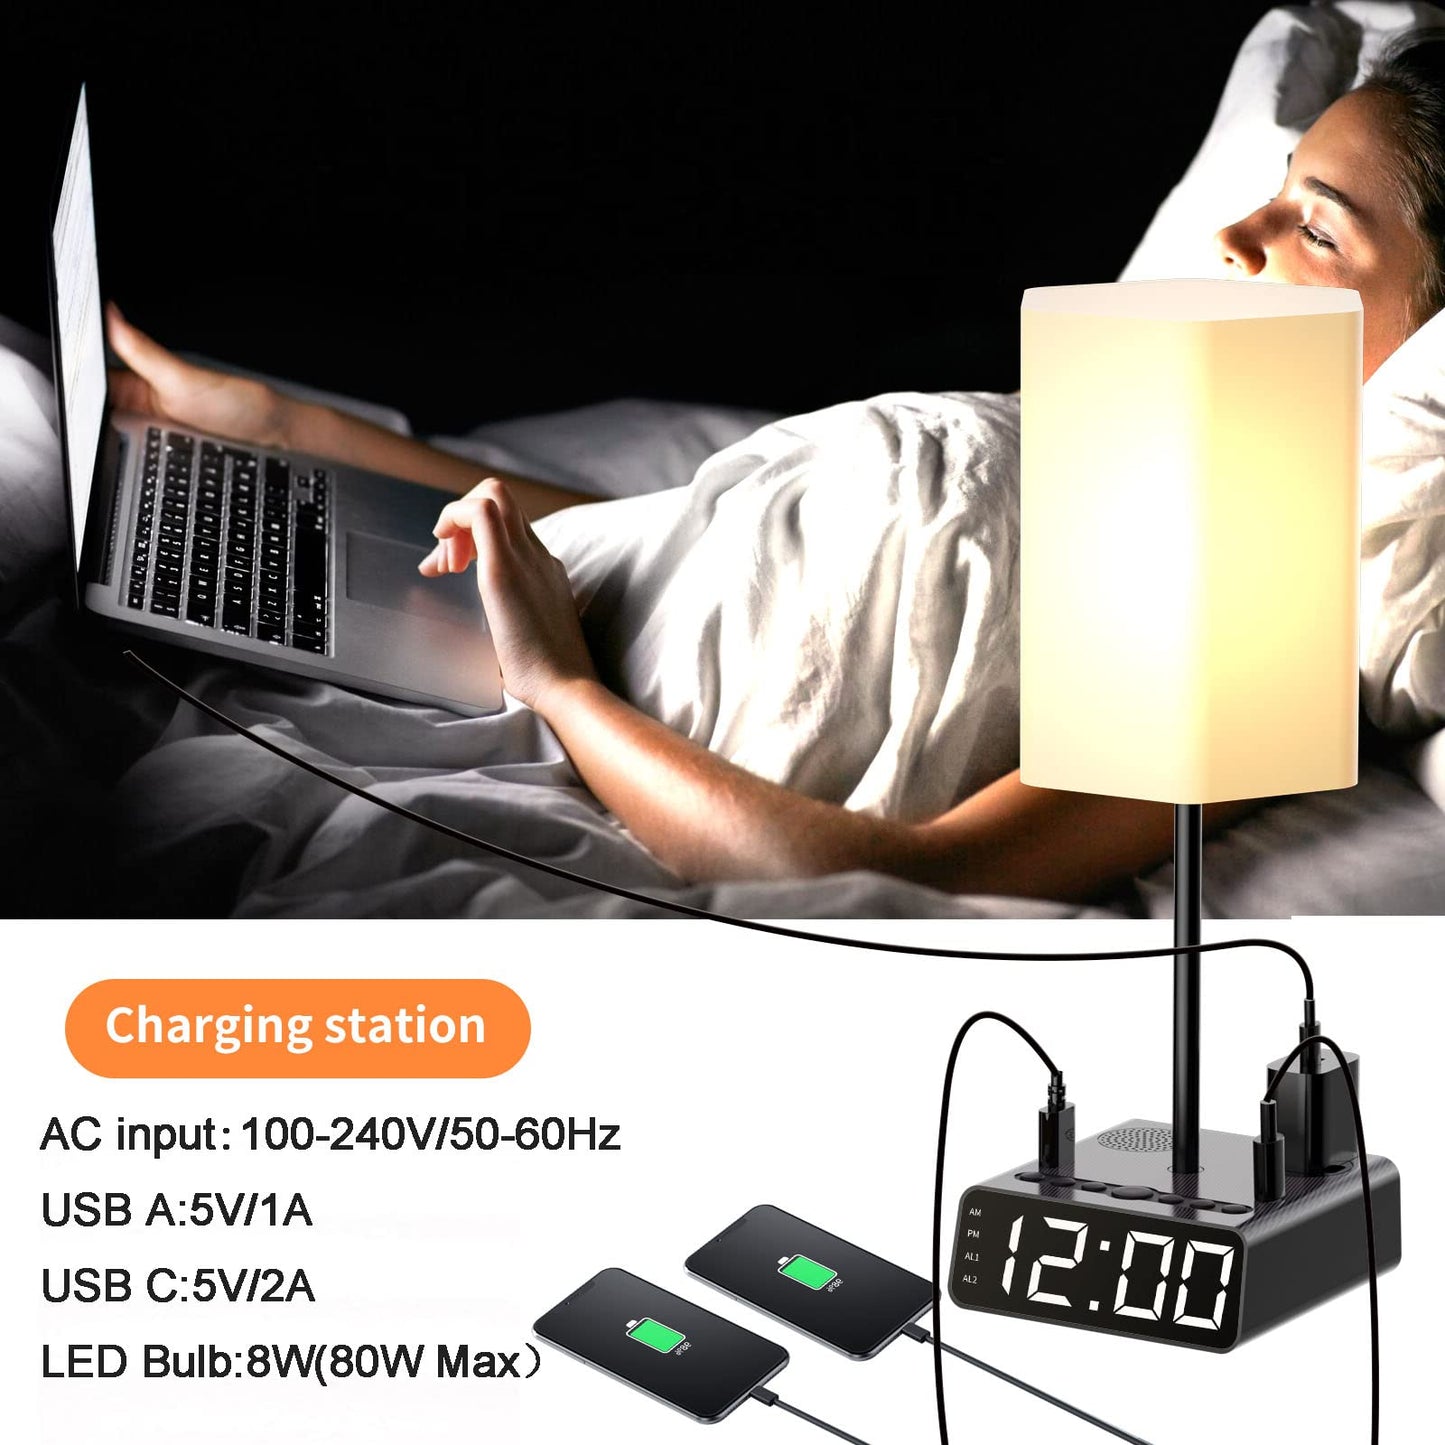 Beside Table Lamp with USB Ports and Outlets & Speakers